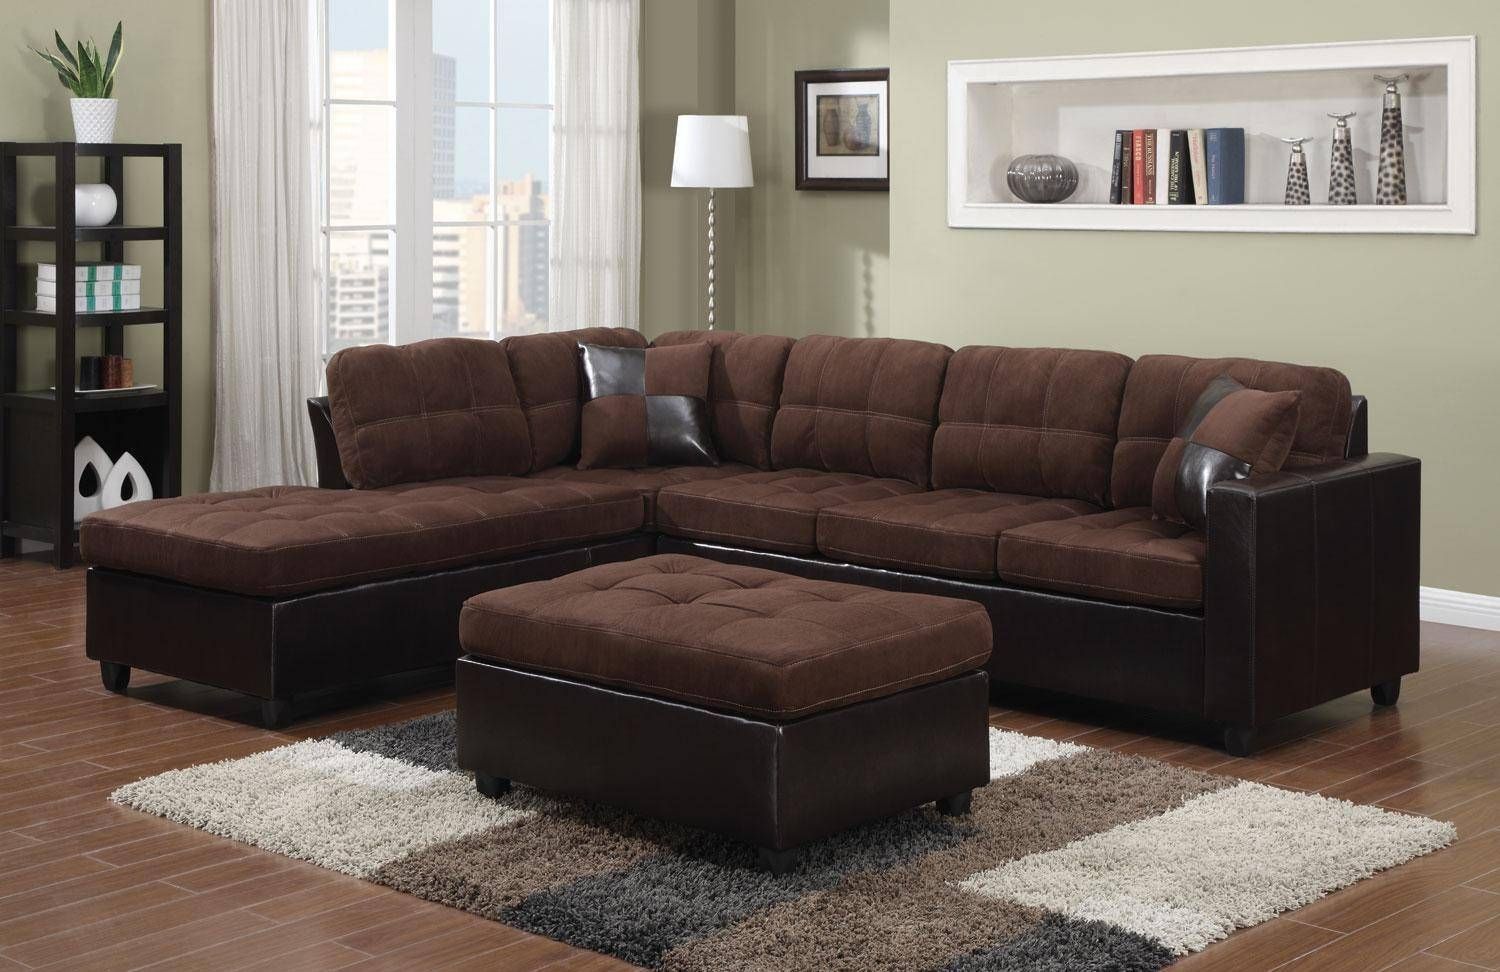 Living Room: Leather Suede Sectional Sofa | Coaster Sectional For Tufted Sectional Sofa With Chaise (View 8 of 30)